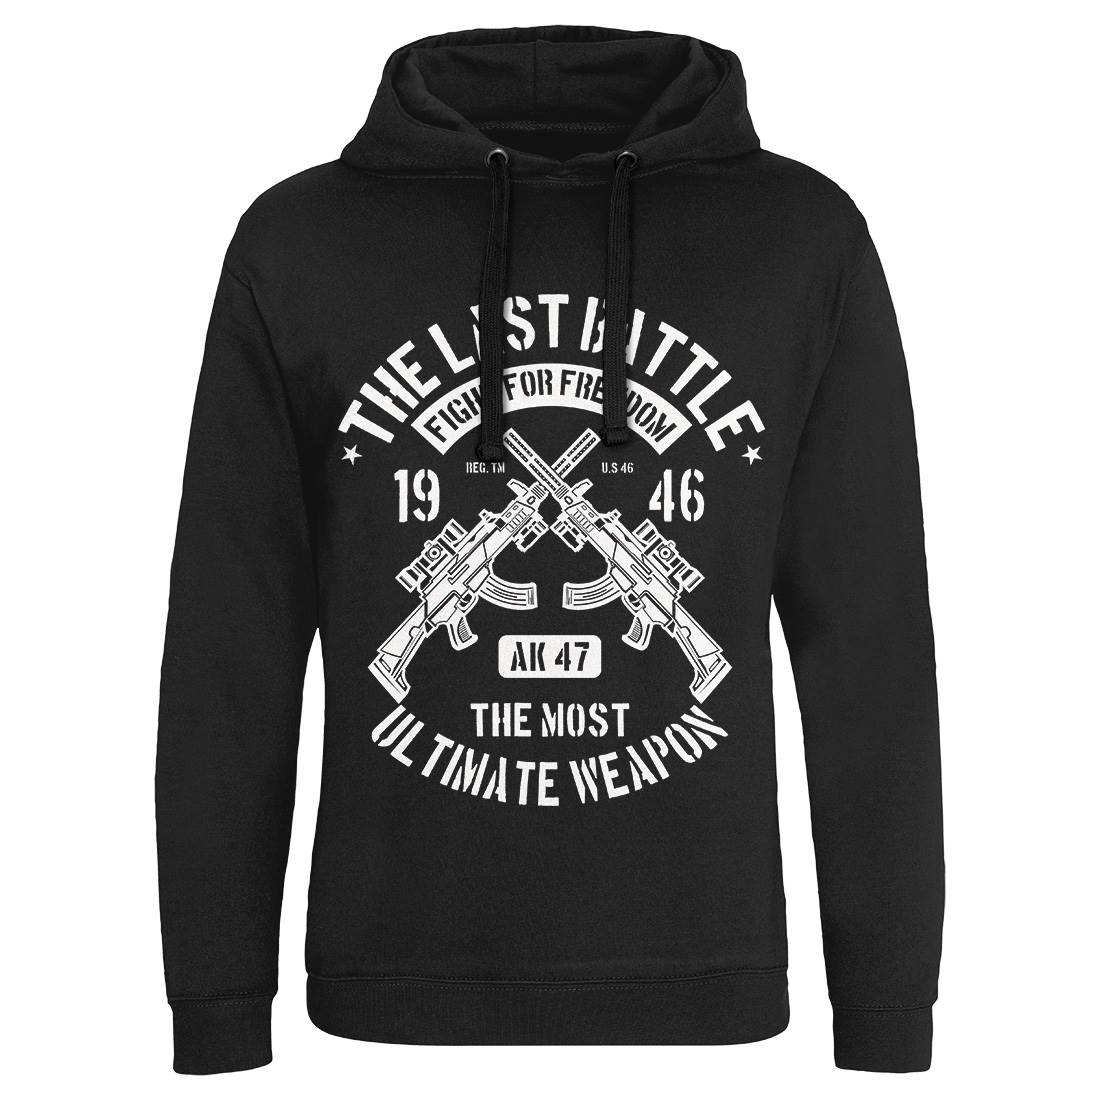 Last Battle Mens Hoodie Without Pocket Army A174